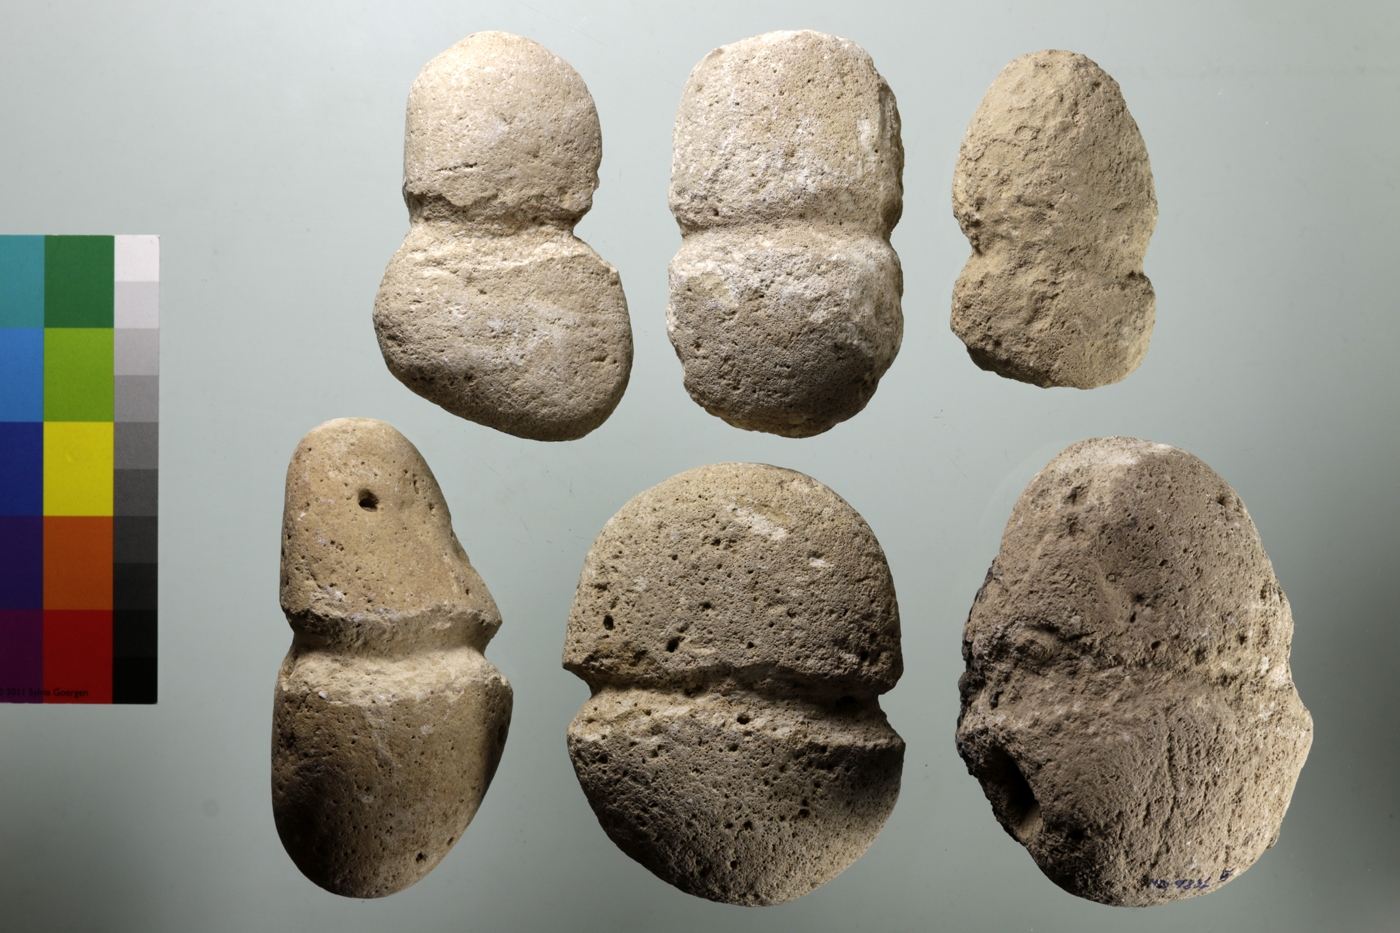 Stones with a narrow groove around their circumference, probably to permit them to be hung and used as weights.